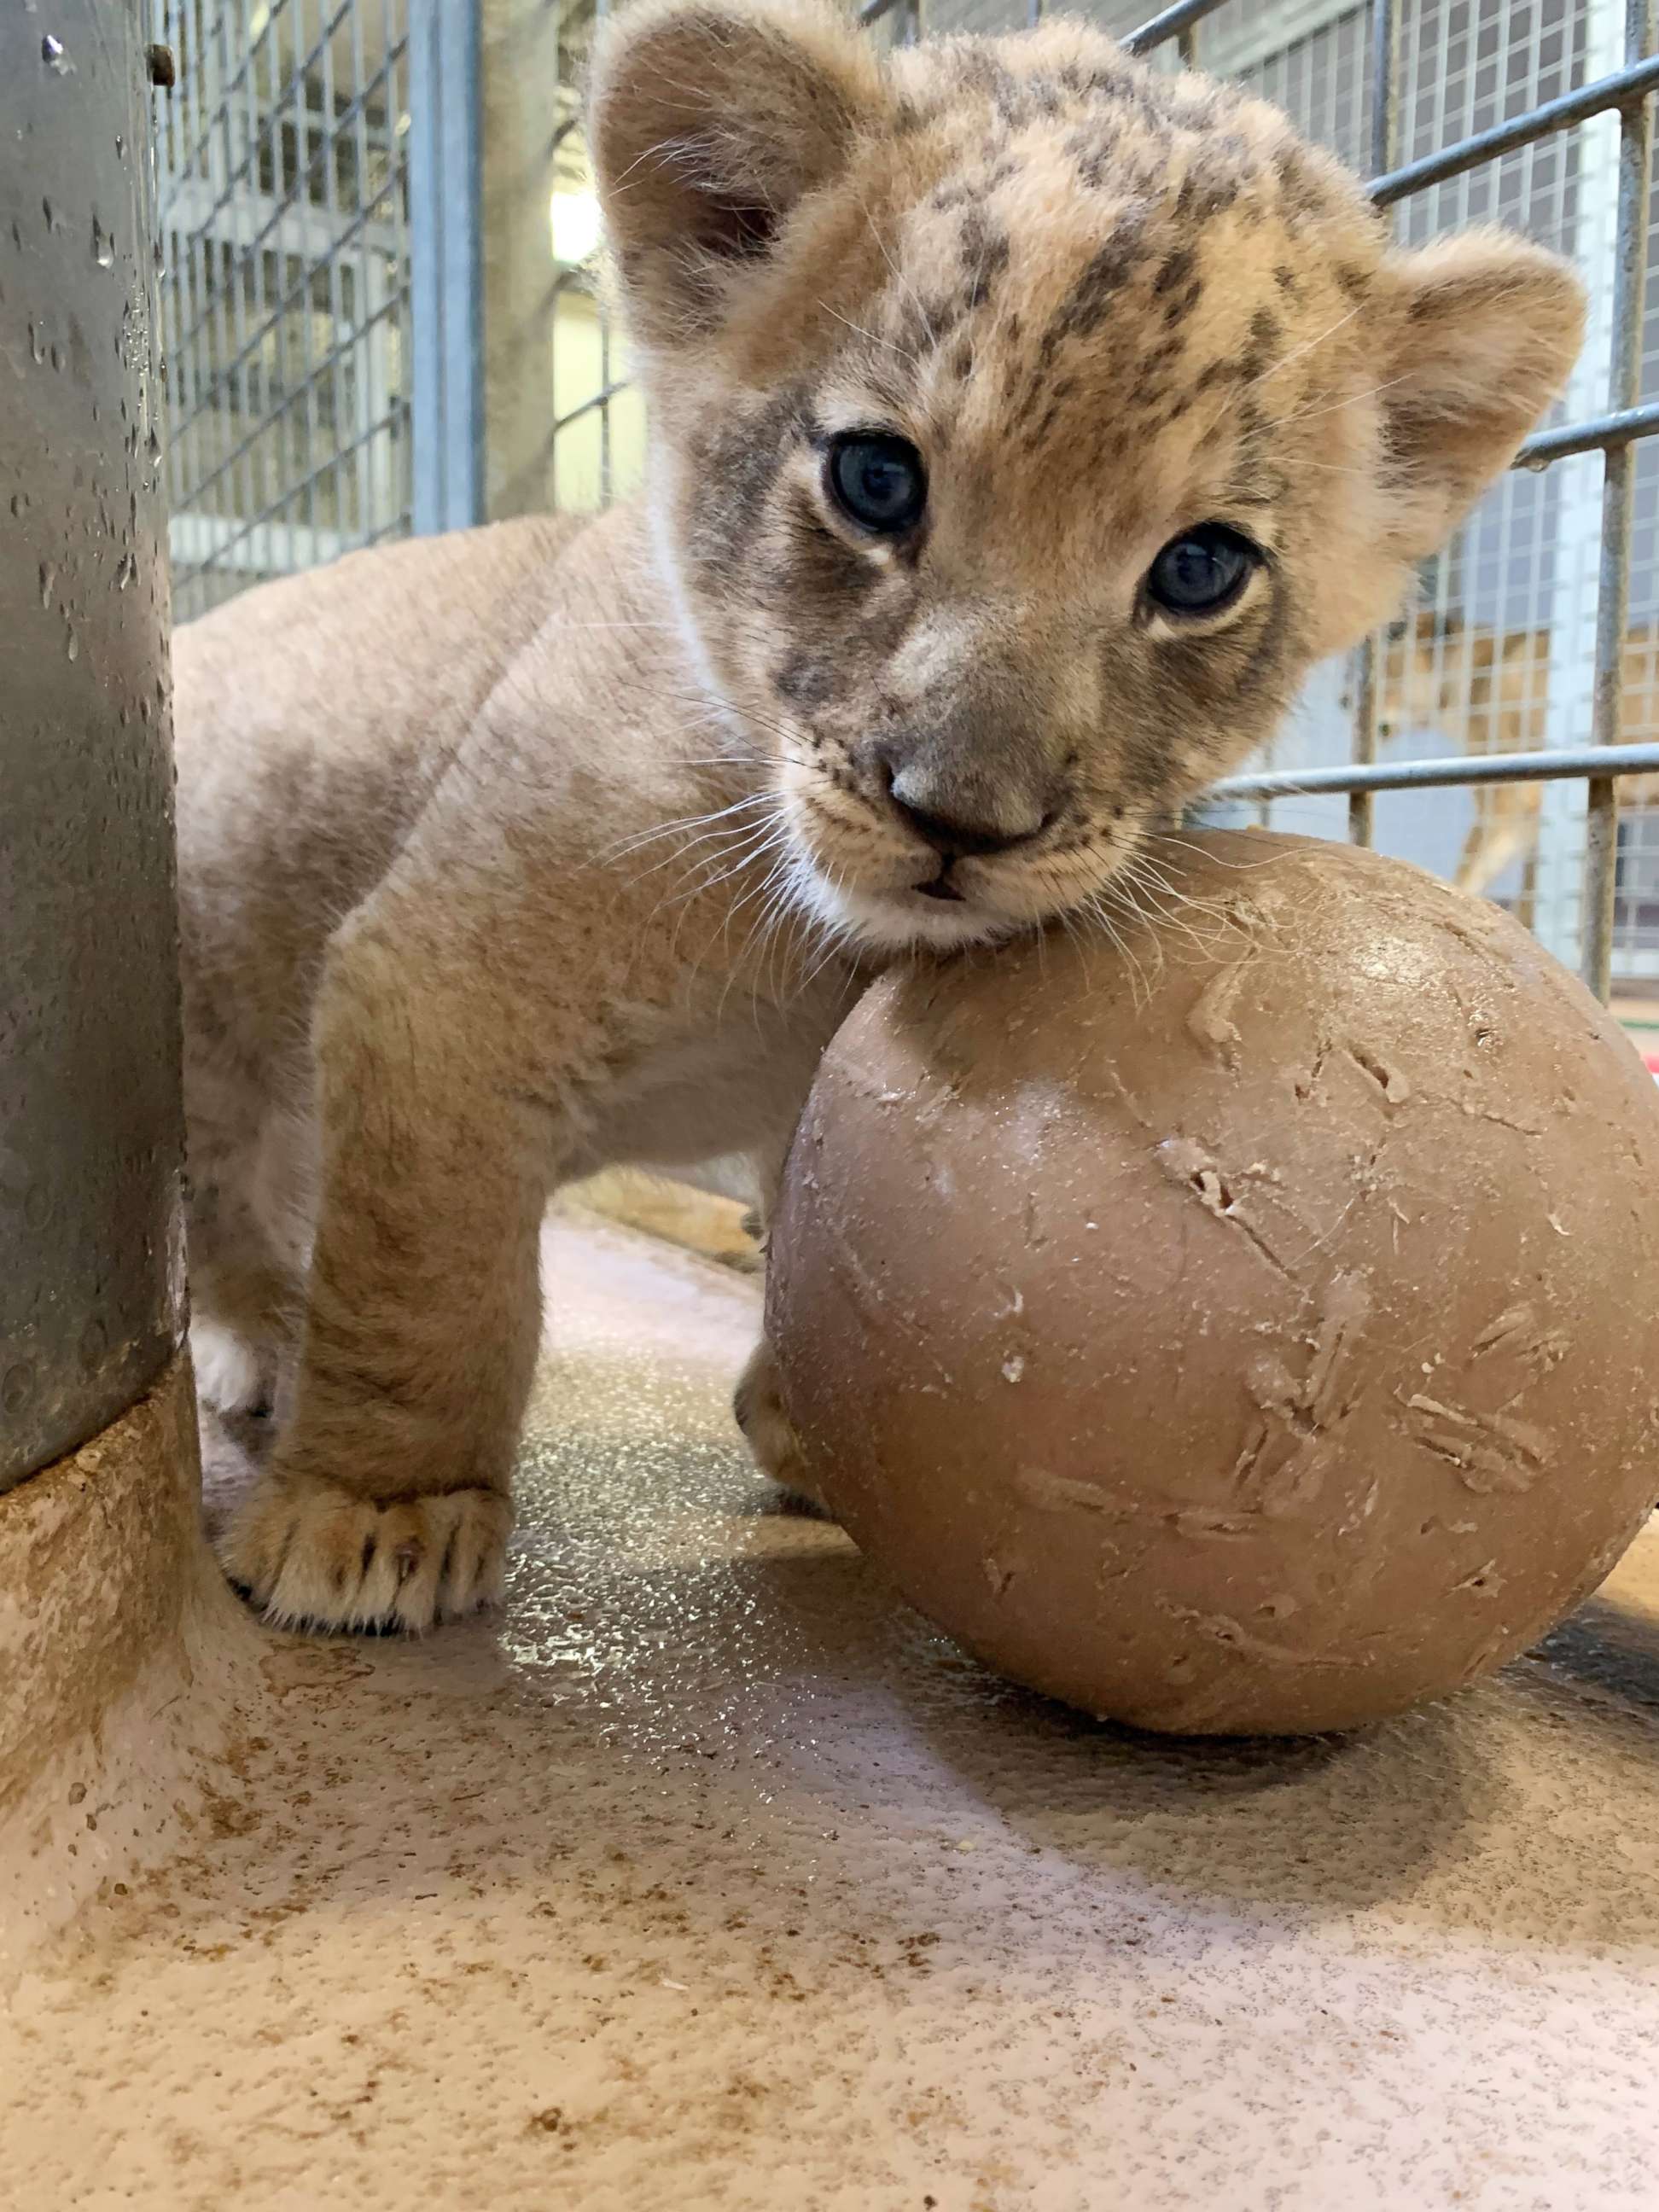 PHOTO: The Denver Zoo's new male lion cub plays with a ball inside his den. The cub has yet to be named, but visitors to the zoo can vote for their favorite name by donating money to the exhibit.